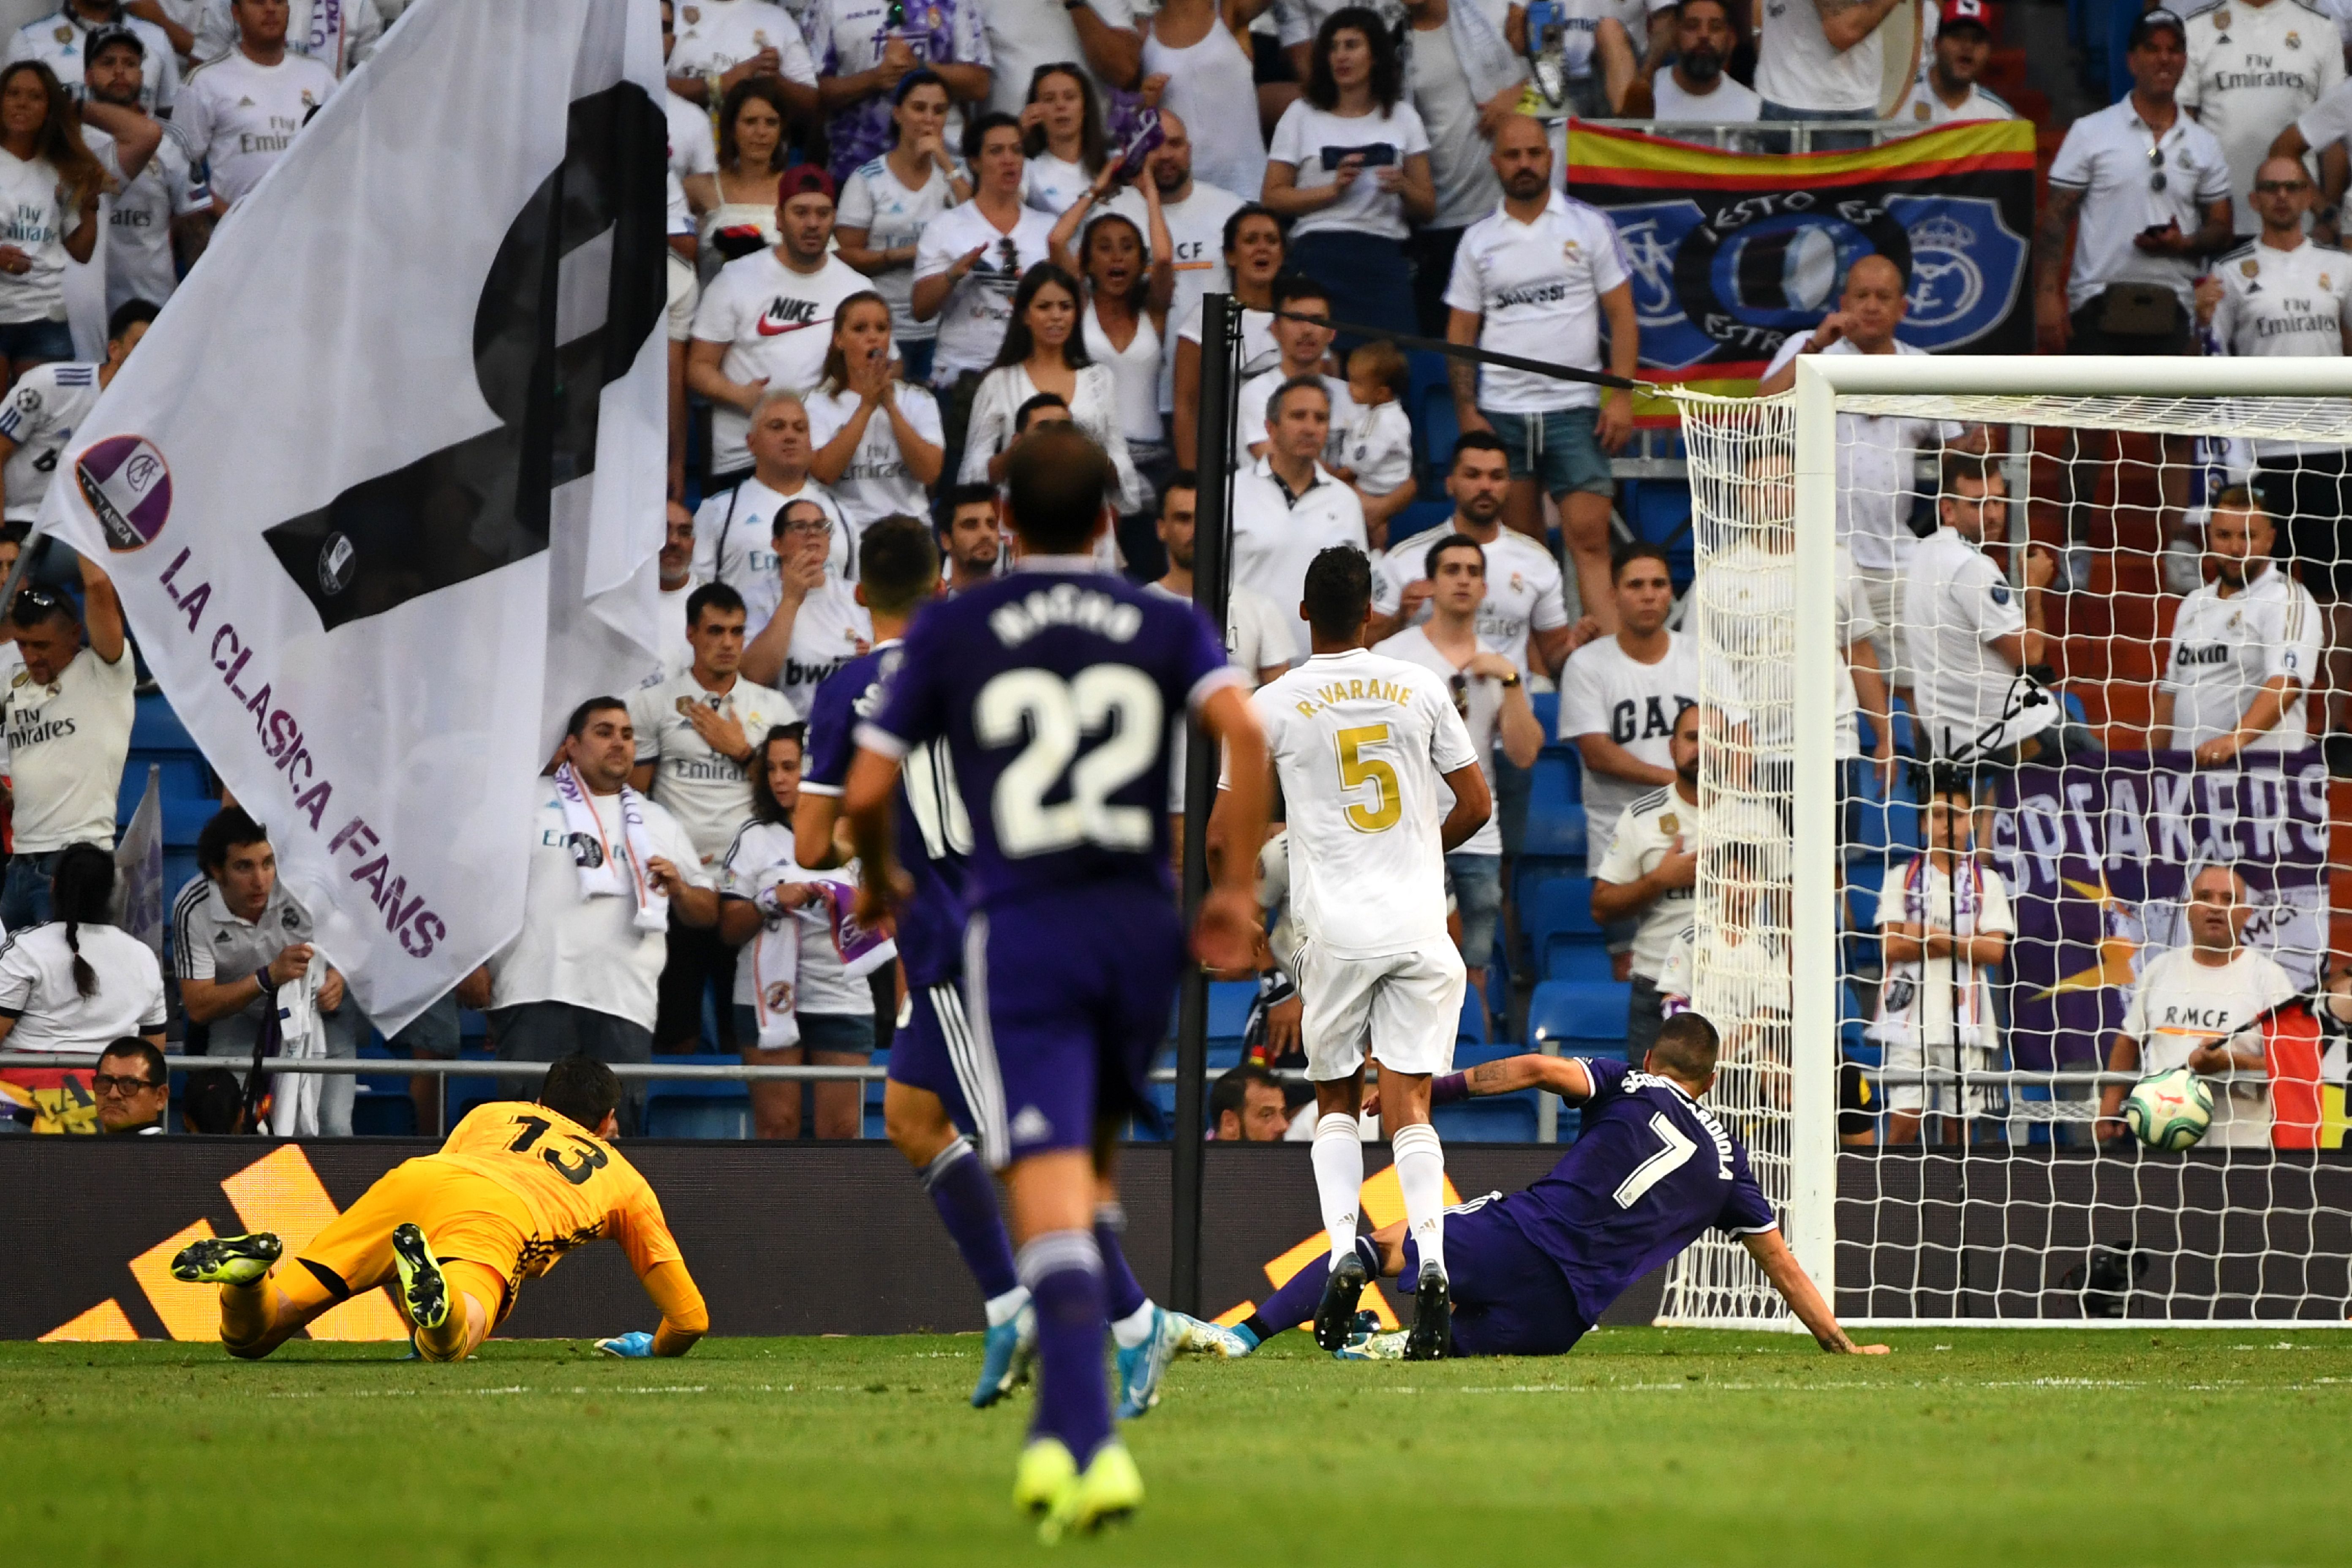 Valladolid's Spanish midfielder Sergio Guardiola (R) scores during the Spanish League football match between Real Madrid and Real Valladolid at the Santiago Bernabeu stadium in Madrid on August 24, 2019. (Photo by GABRIEL BOUYS / AFP)        (Photo credit should read GABRIEL BOUYS/AFP/Getty Images)